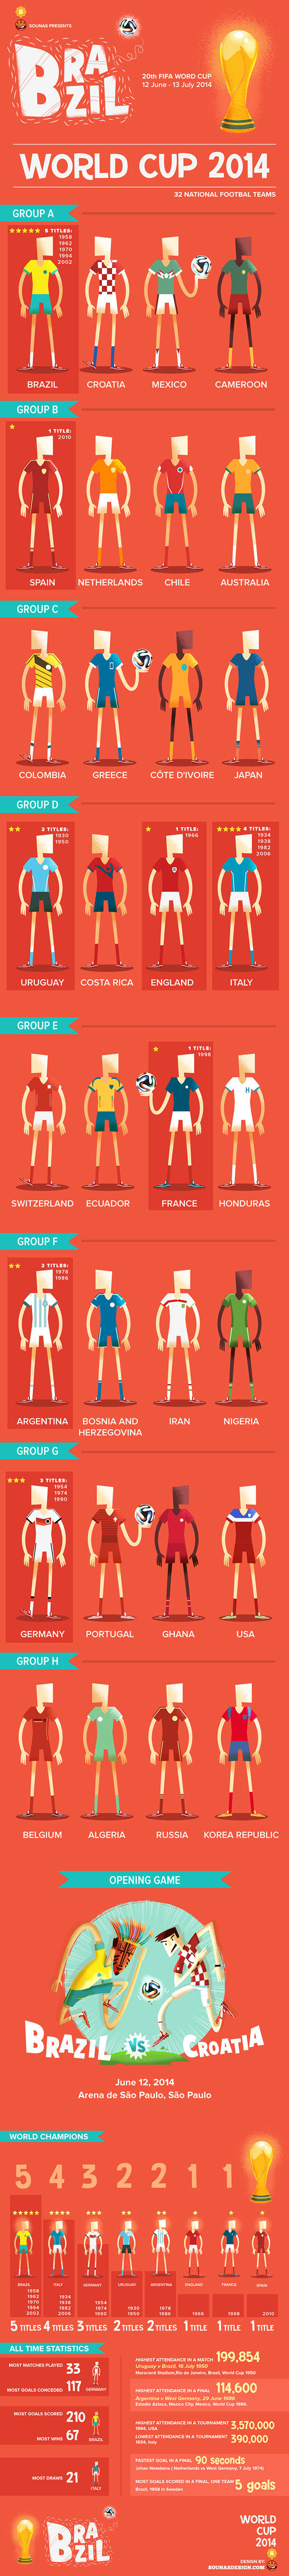 World Cup Brazil 2014 infographic by designer and illustrator Ilias Sounas from Athens, Greece